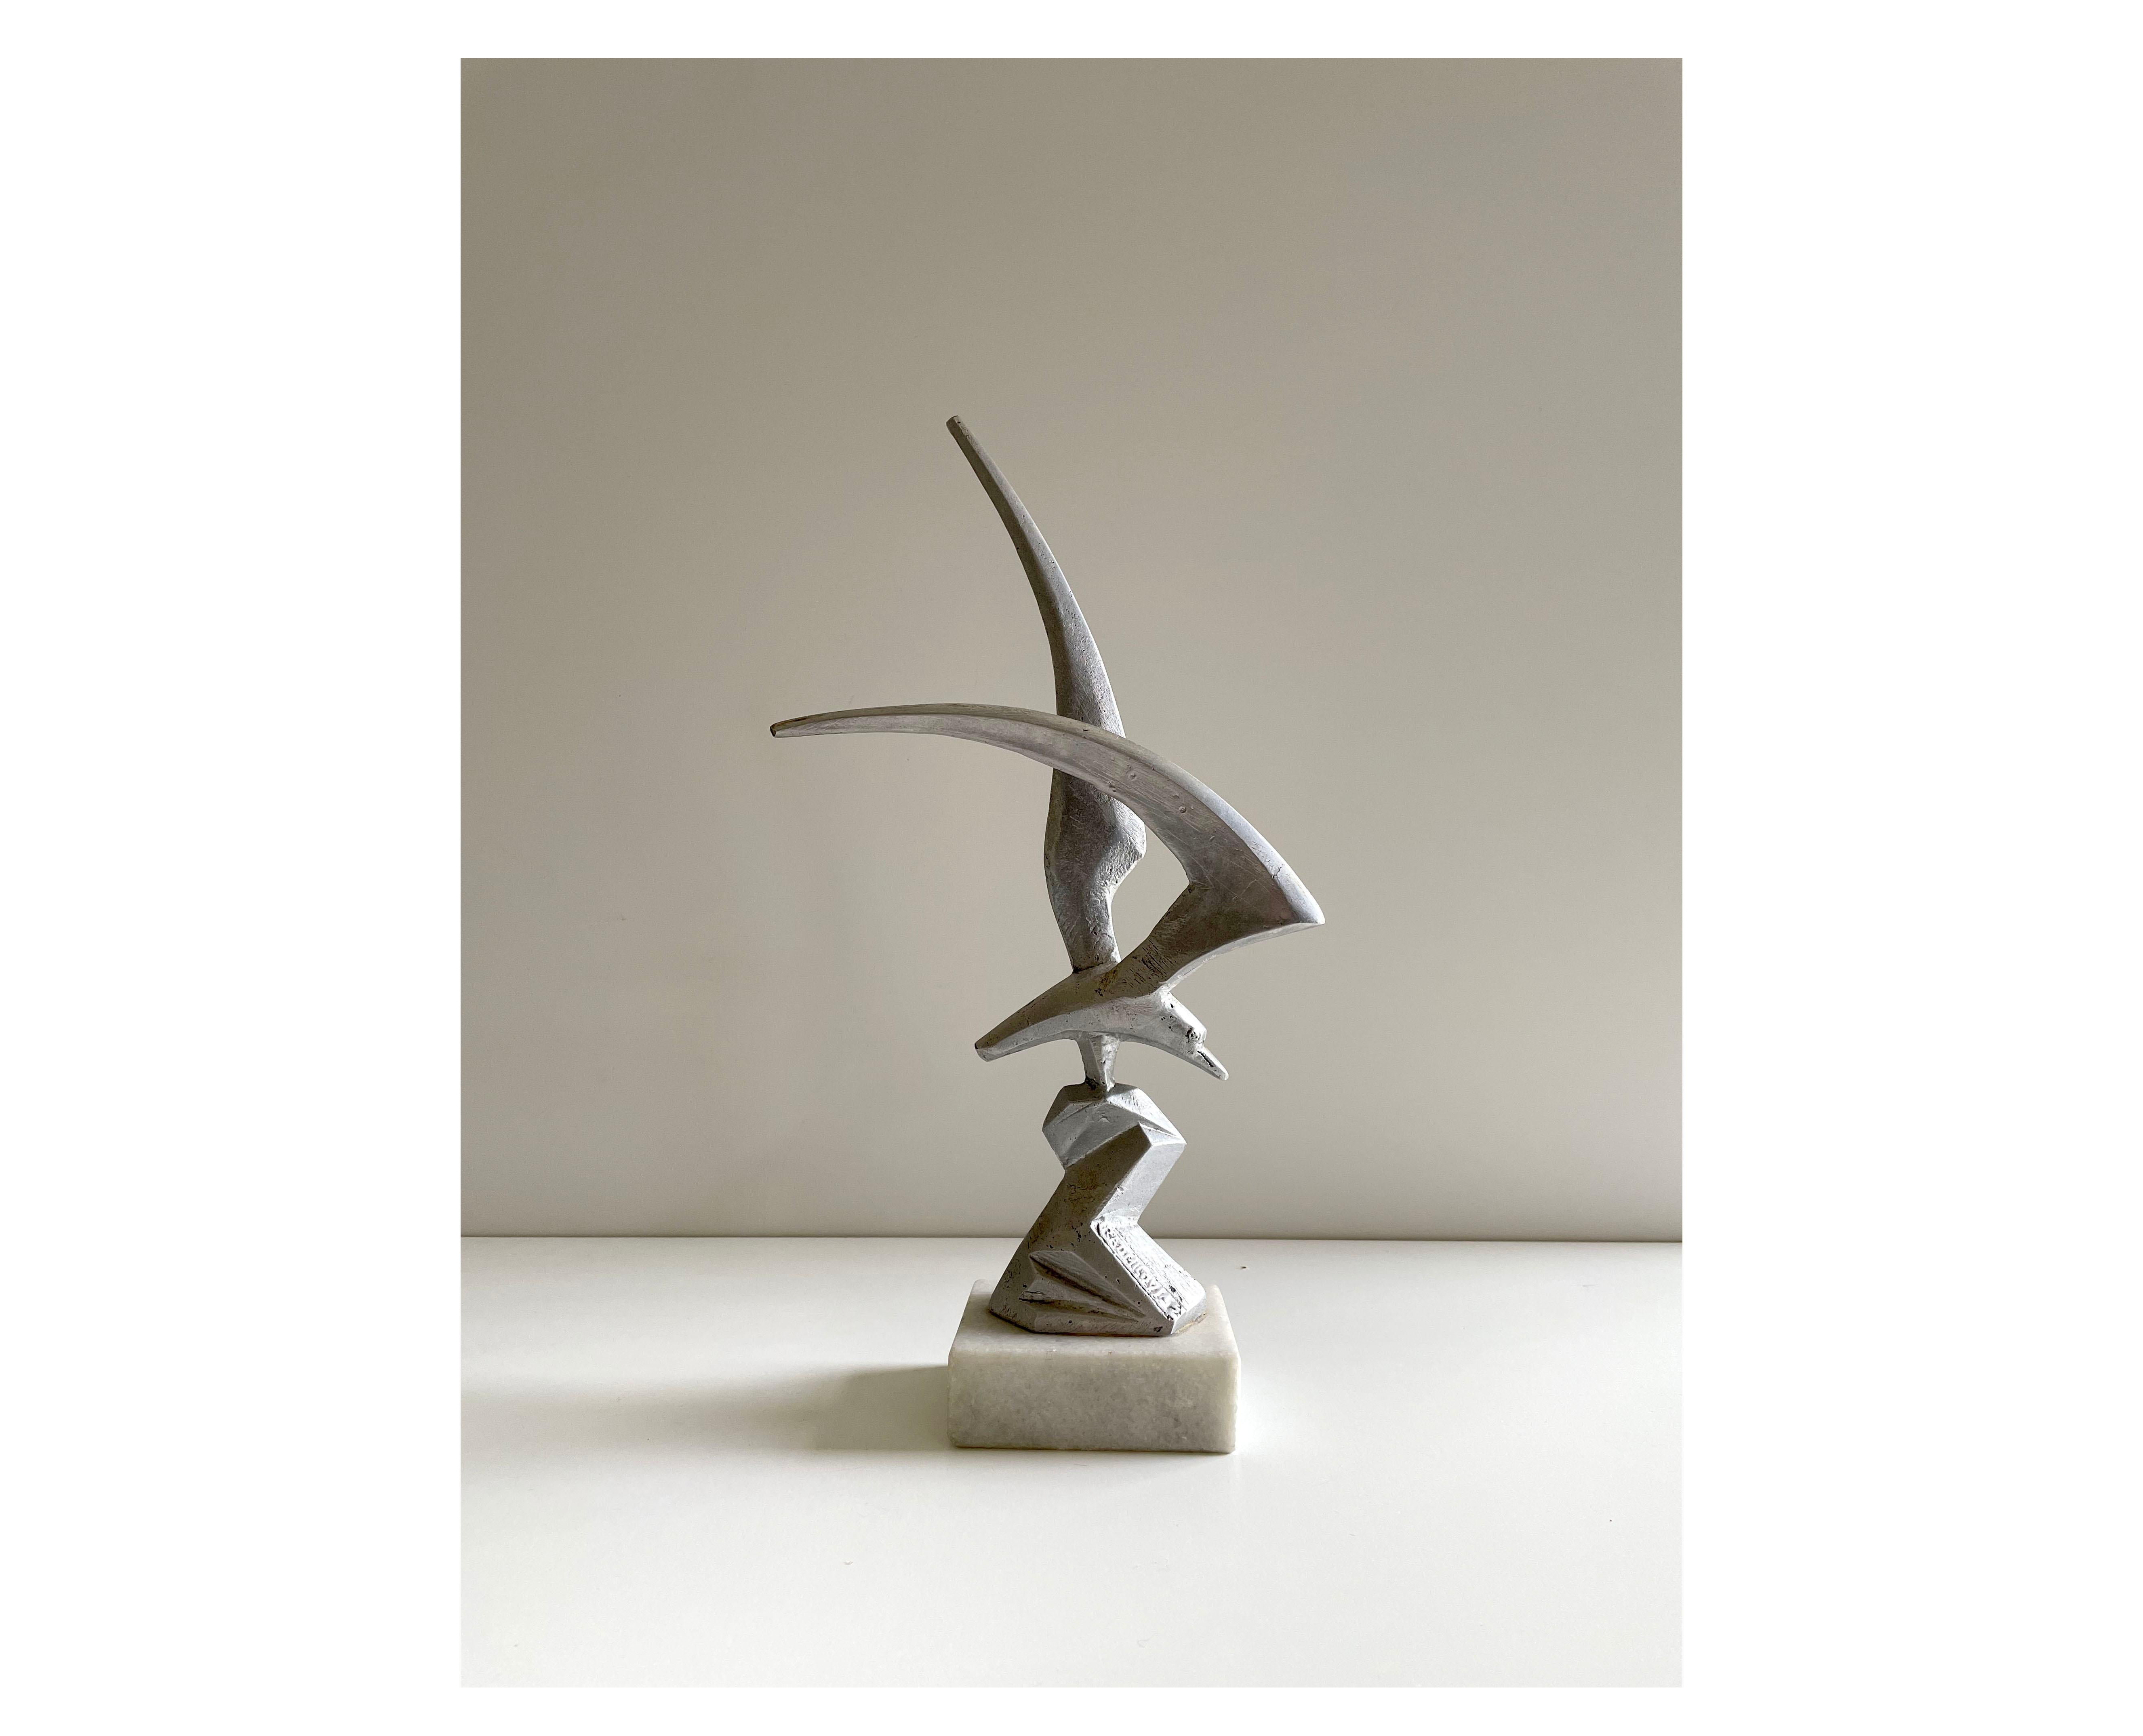 Mid-Century Modern statue of a sea-gull made of aluminum (duralumin - aluminum alloy) and mounted on the white marble base

Signed 'Radmilovic' and 'Jugoplastika'

Age: 1960s/1970s

Dimensions: c. 39 x 21 x 8 cm (H/W/D)
Weight: 1.32 kg

The